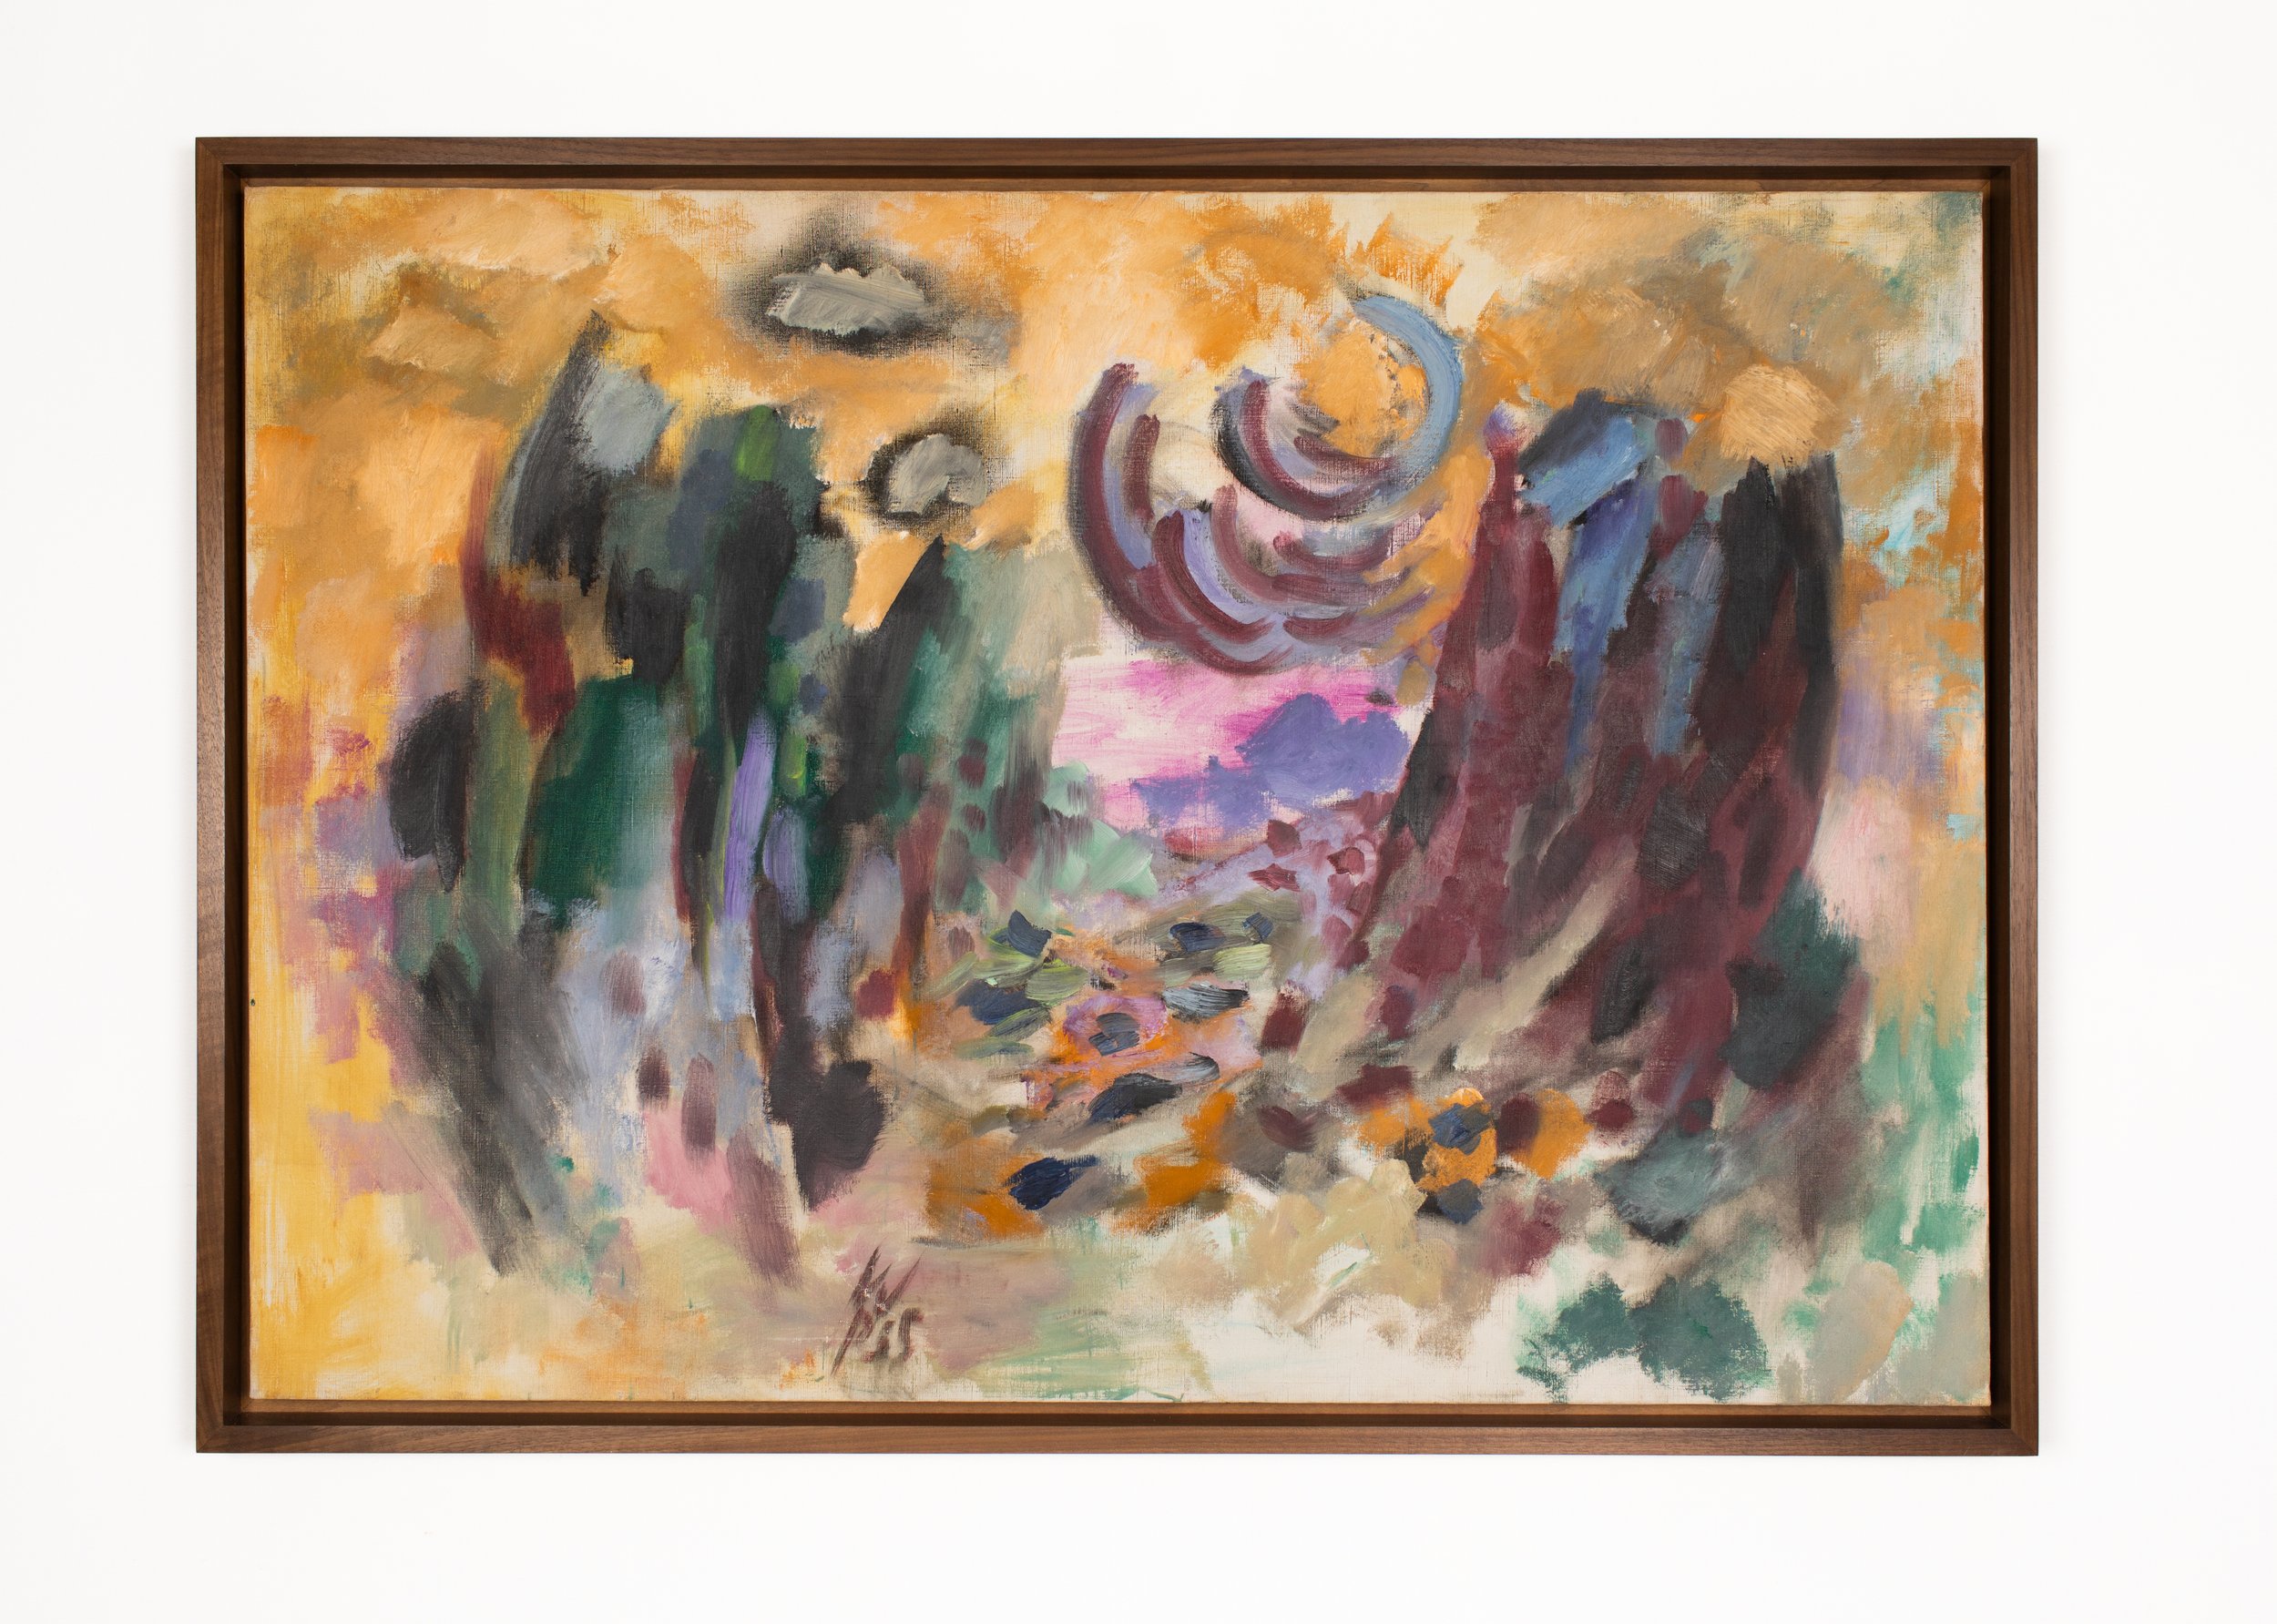  Wolfgang Paalen,  Tepoztlán I (The Valley),  1955, oil on canvas, 31.9 x 45.75 in (81 x 116.2 cm) 